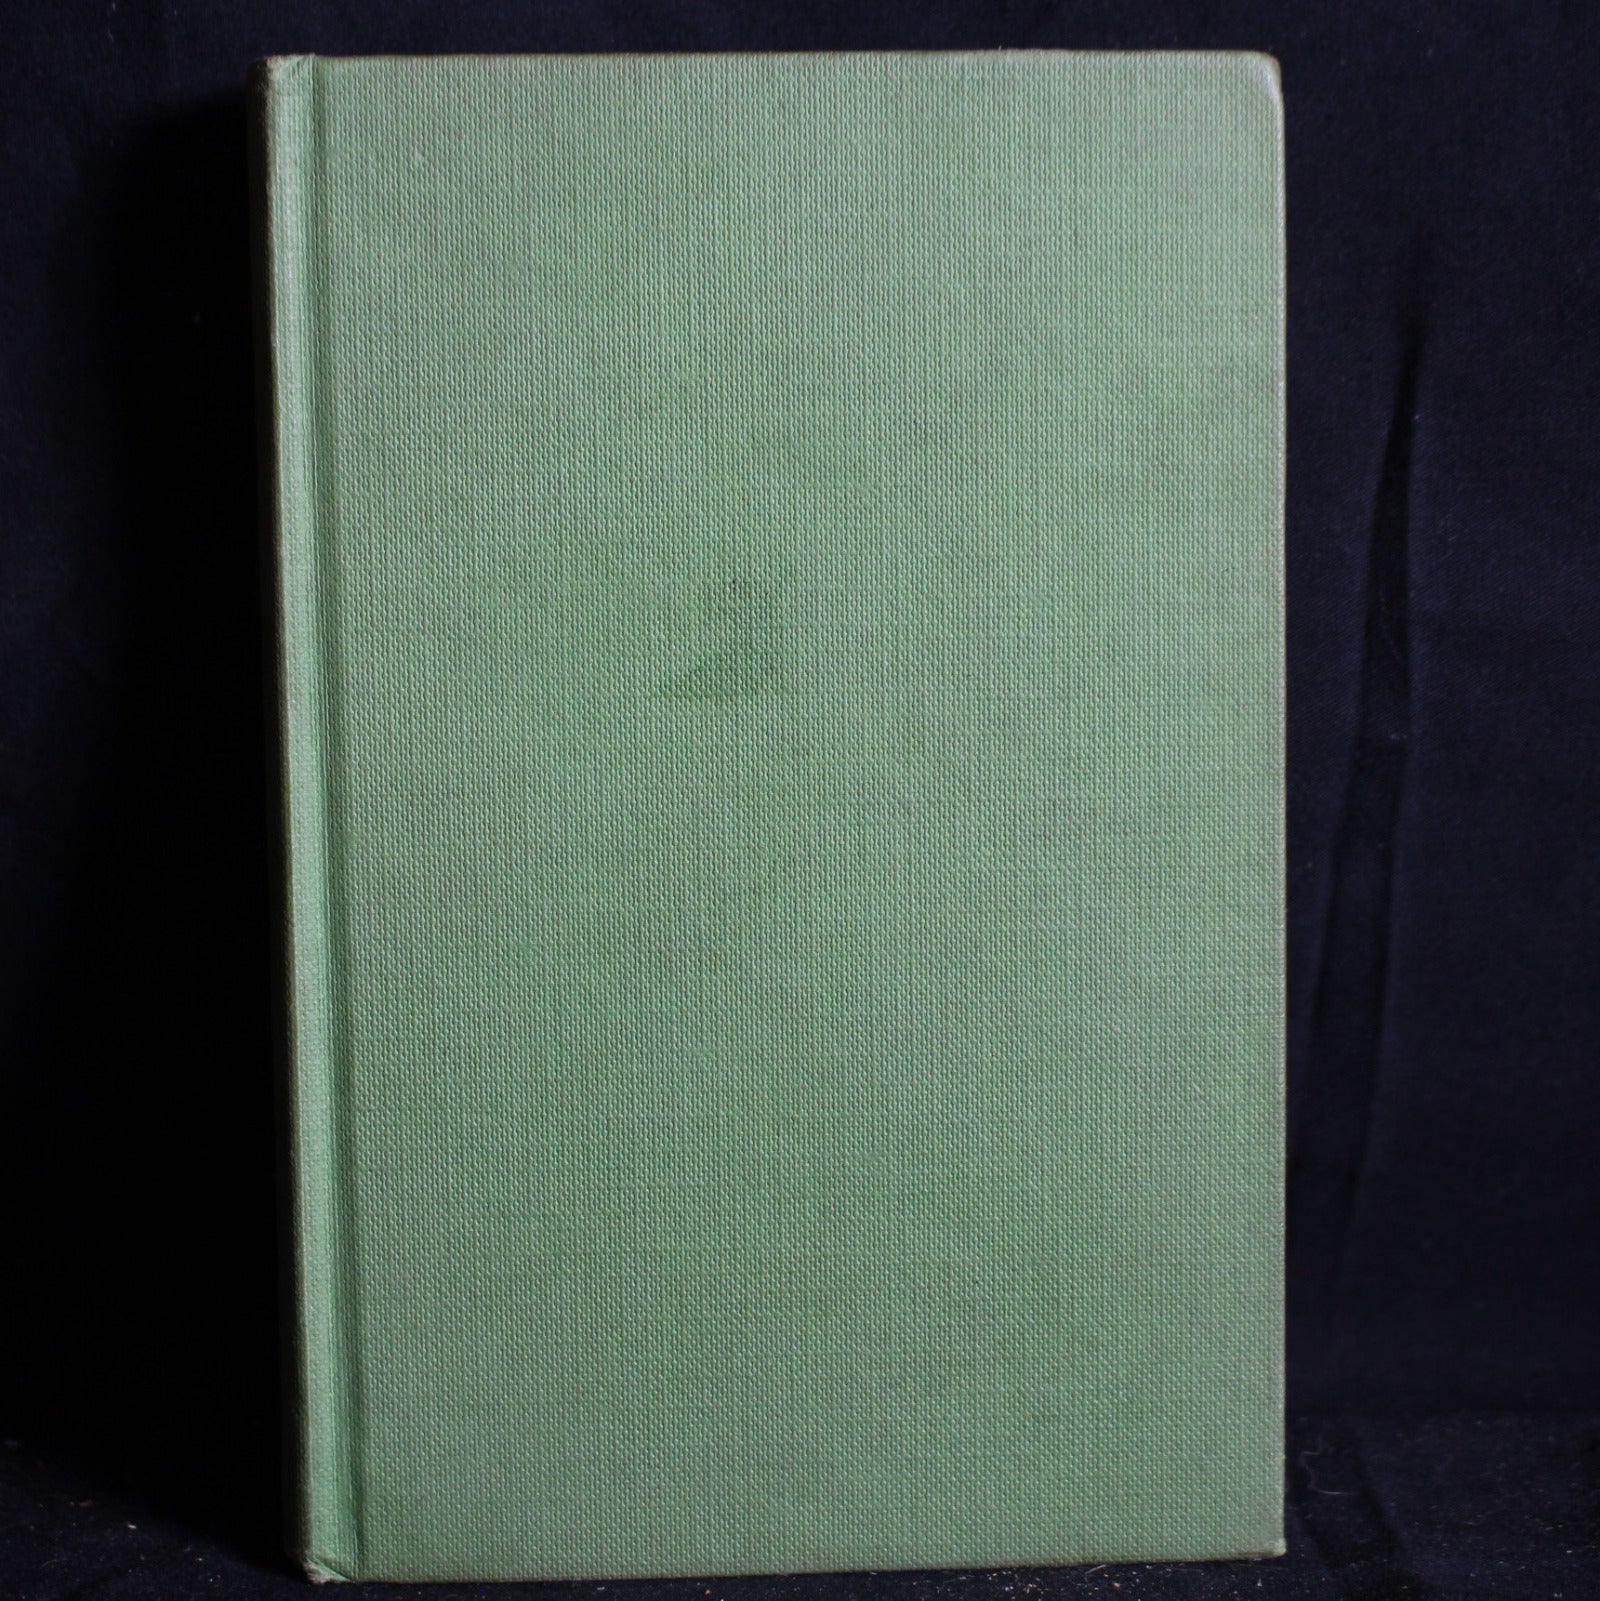 Vintage Hardcover Canadian First Edition Lost Horizon by James Hilton, 1943